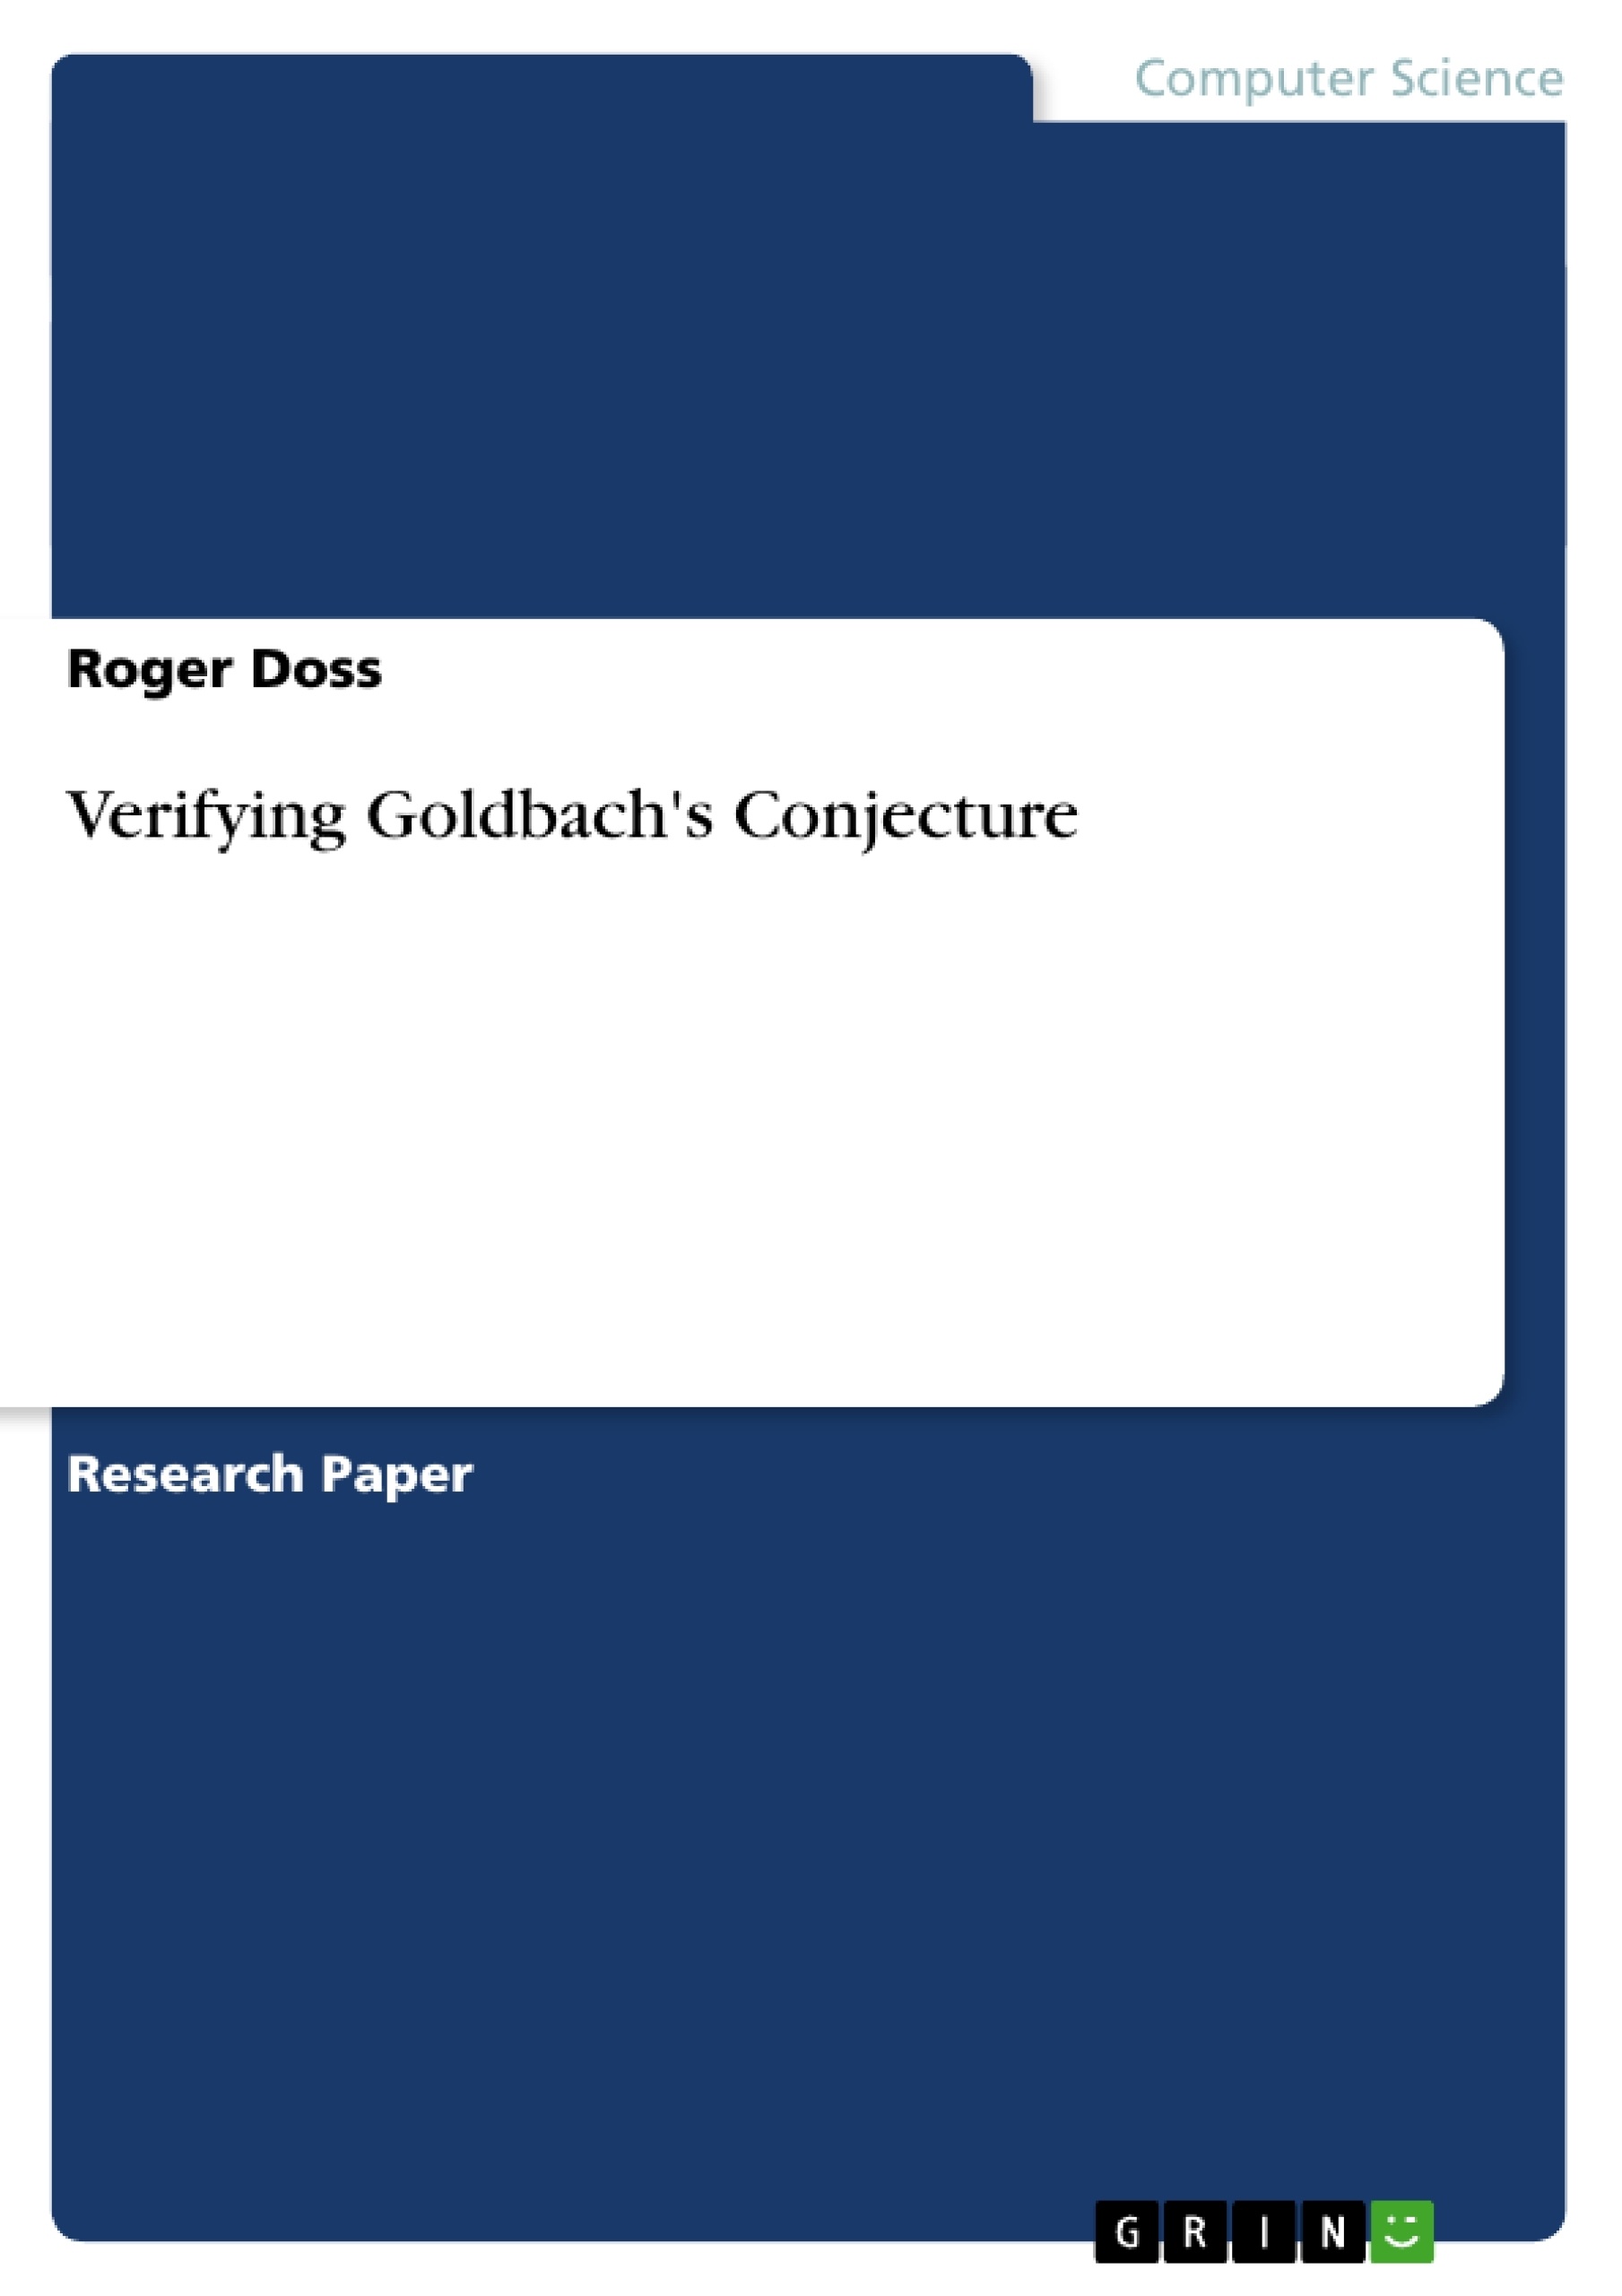 Title: Verifying Goldbach's Conjecture